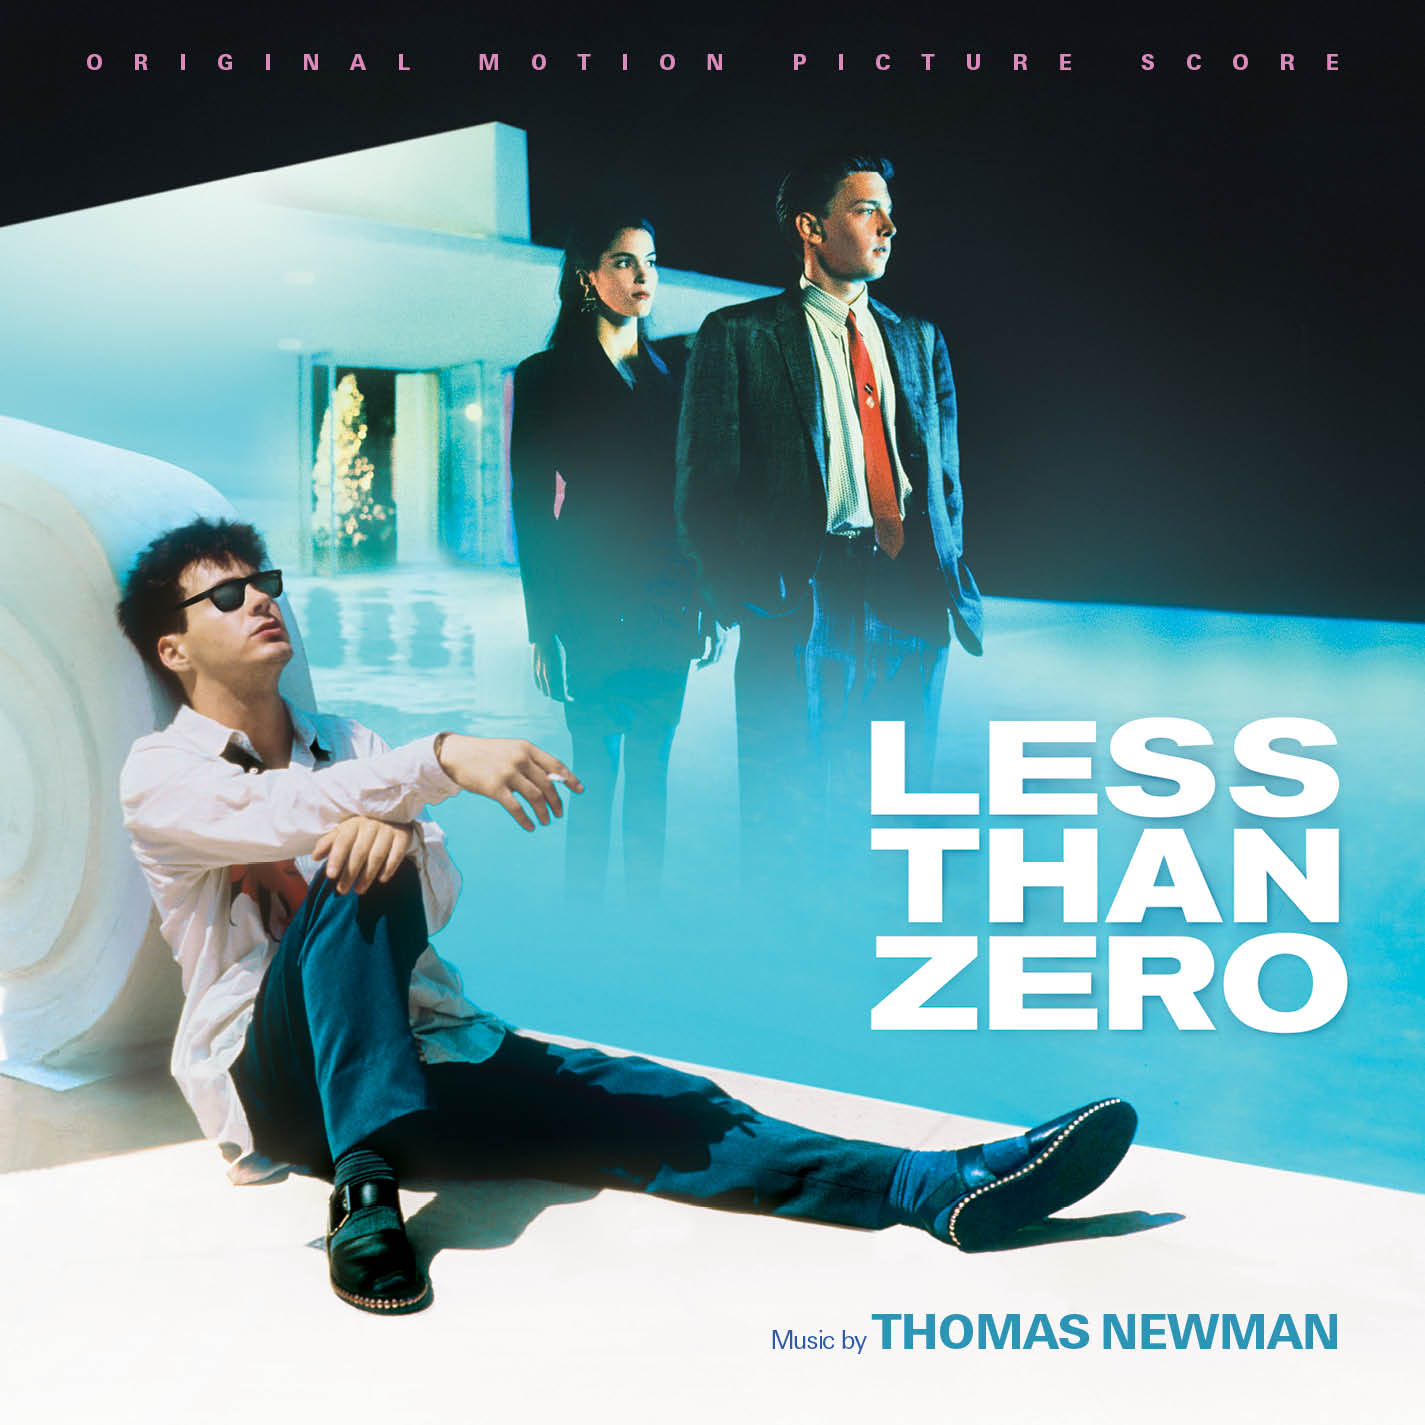 Less than Zero: Limited Edition